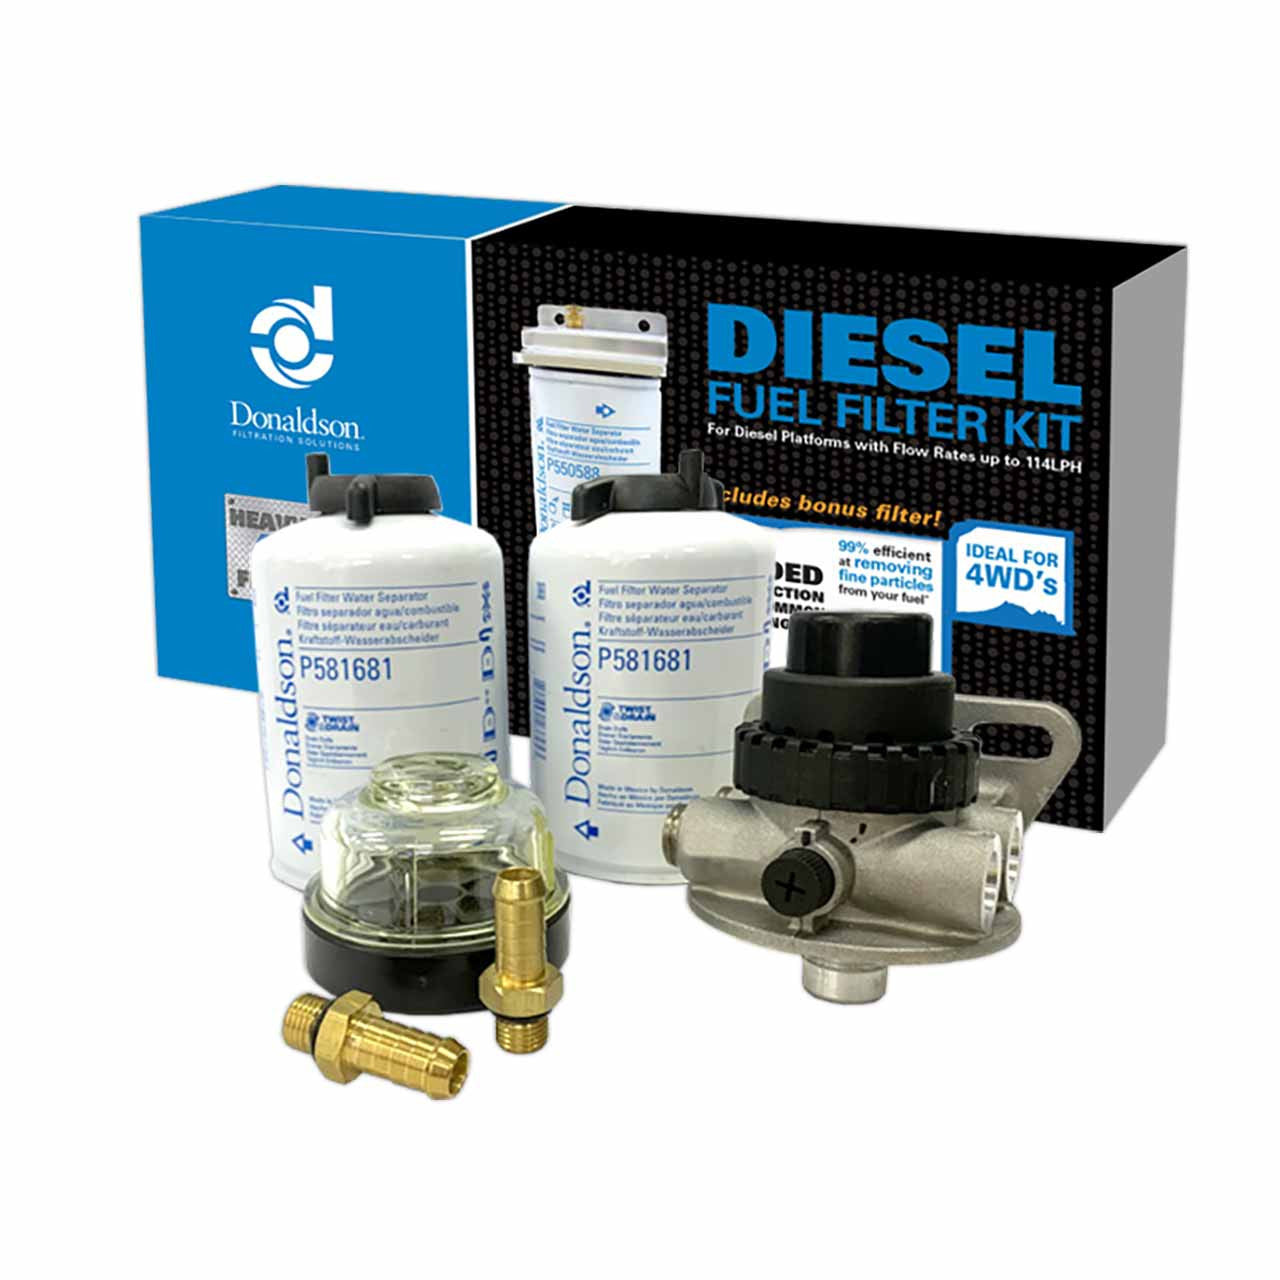 X900167 Diesel Fuel Filter Kit with Priming Pump 3 Micron Flow Rates max.220lph